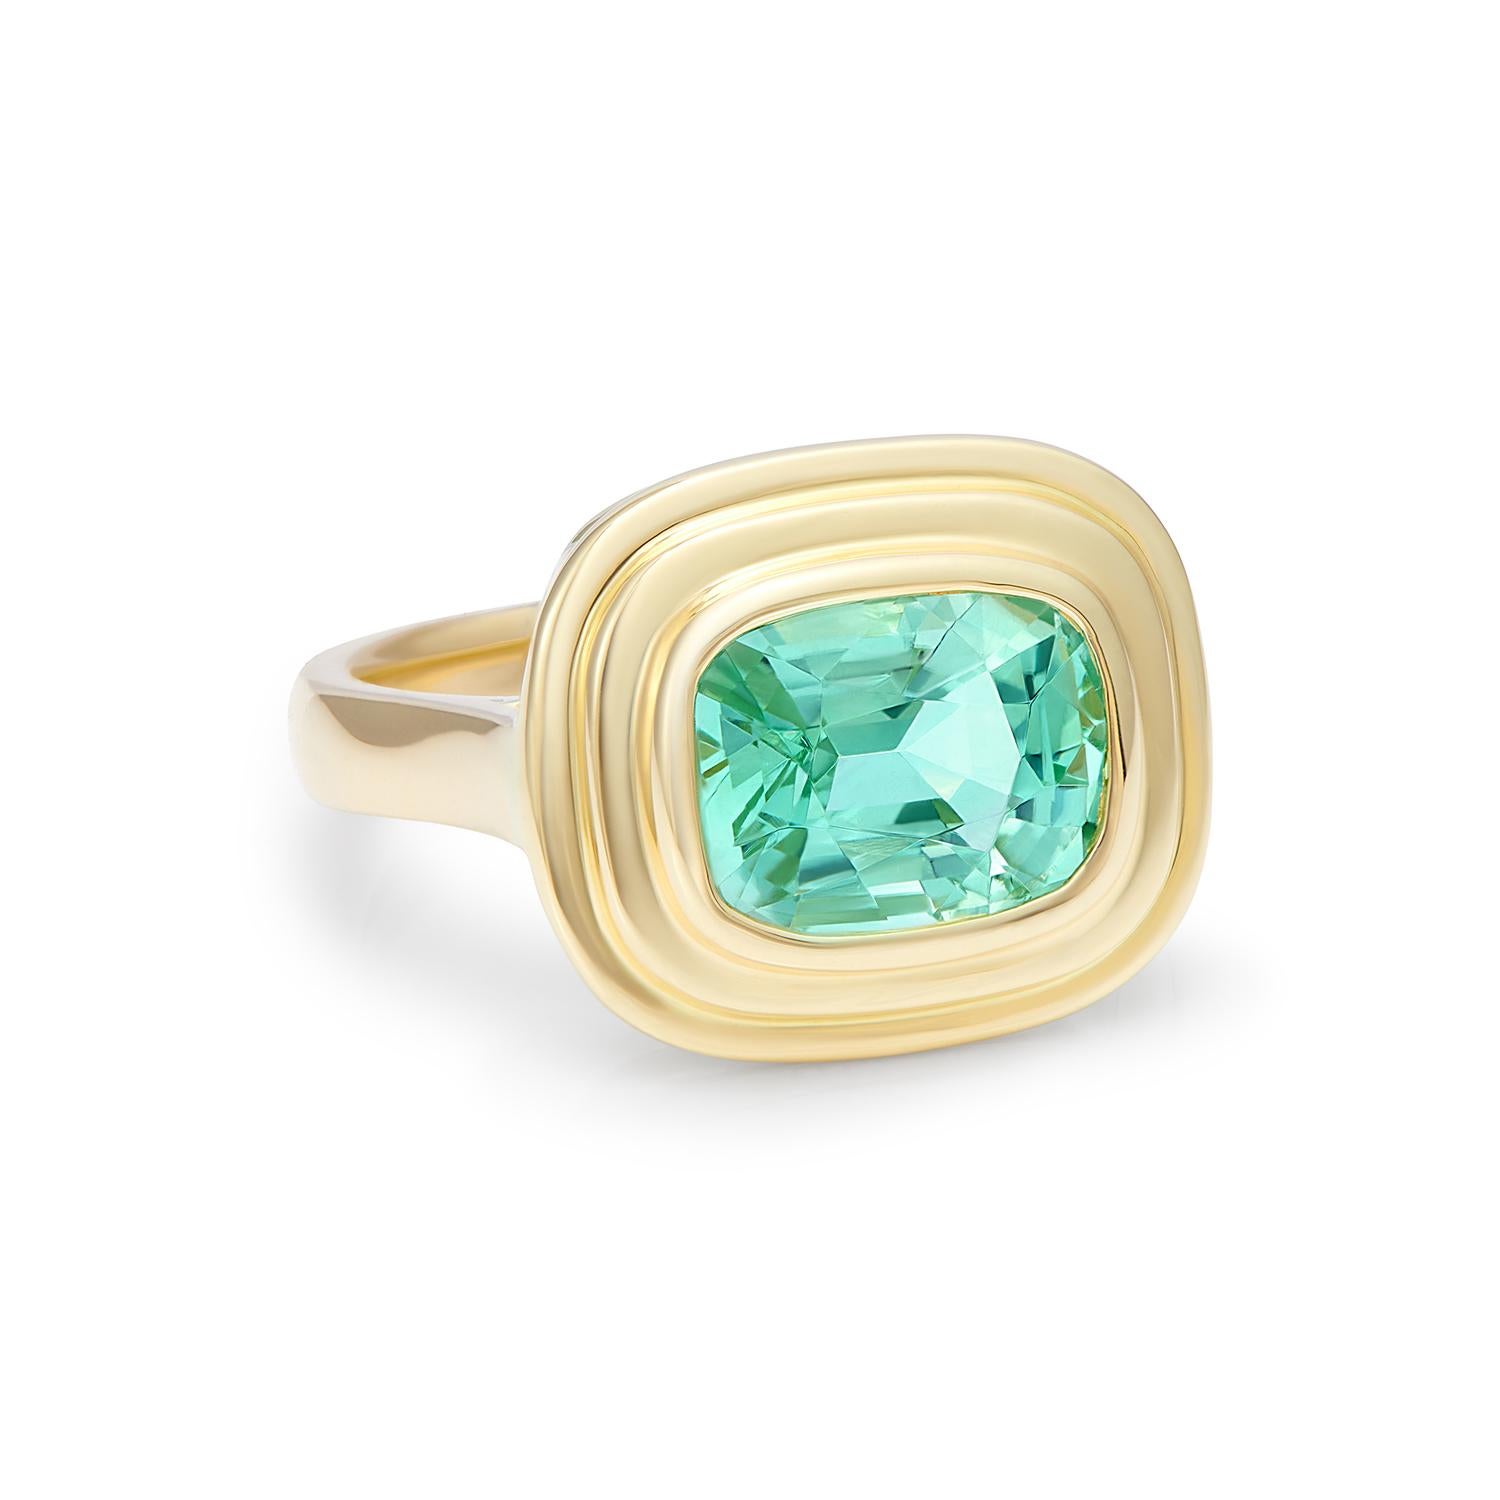 18kt Yellow Gold
Tourmaline

One-of-a-kind, 2.70ct Tourmaline set into the Athena setting

Ring size M 1/2 (USA 6 1/2) - Complimentary ring sizing on request

2.70 carat blue/green Tourmaline set in 18 karat yellow gold. This beautiful neon